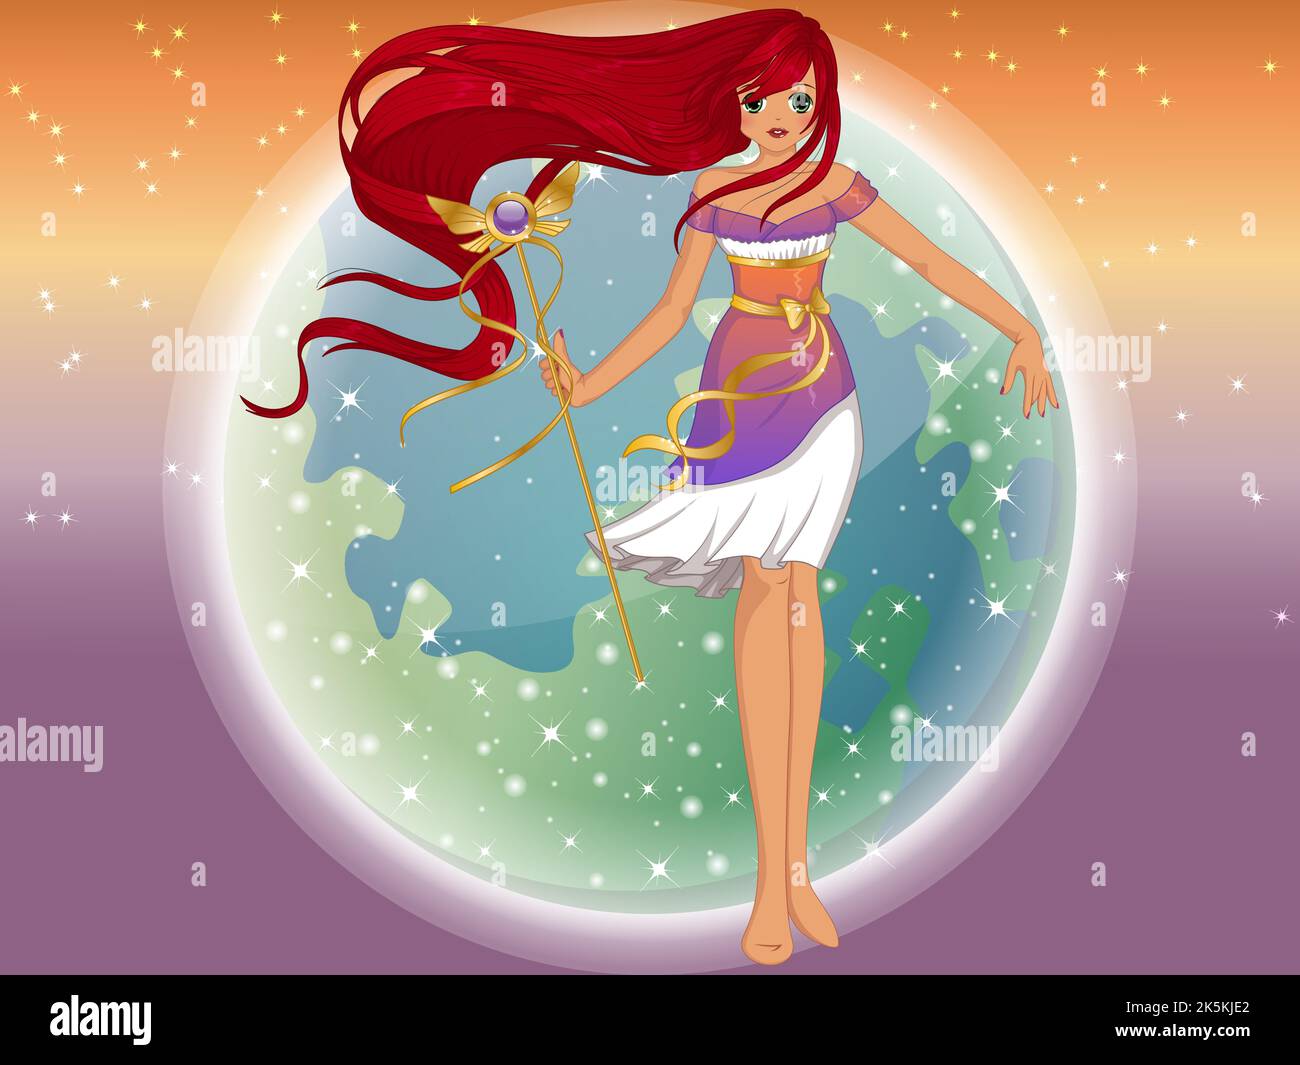 Fantasy Manga Style Princess with Long Red Hair on a Hazy Planet Background. Vector Illustration Stock Vector